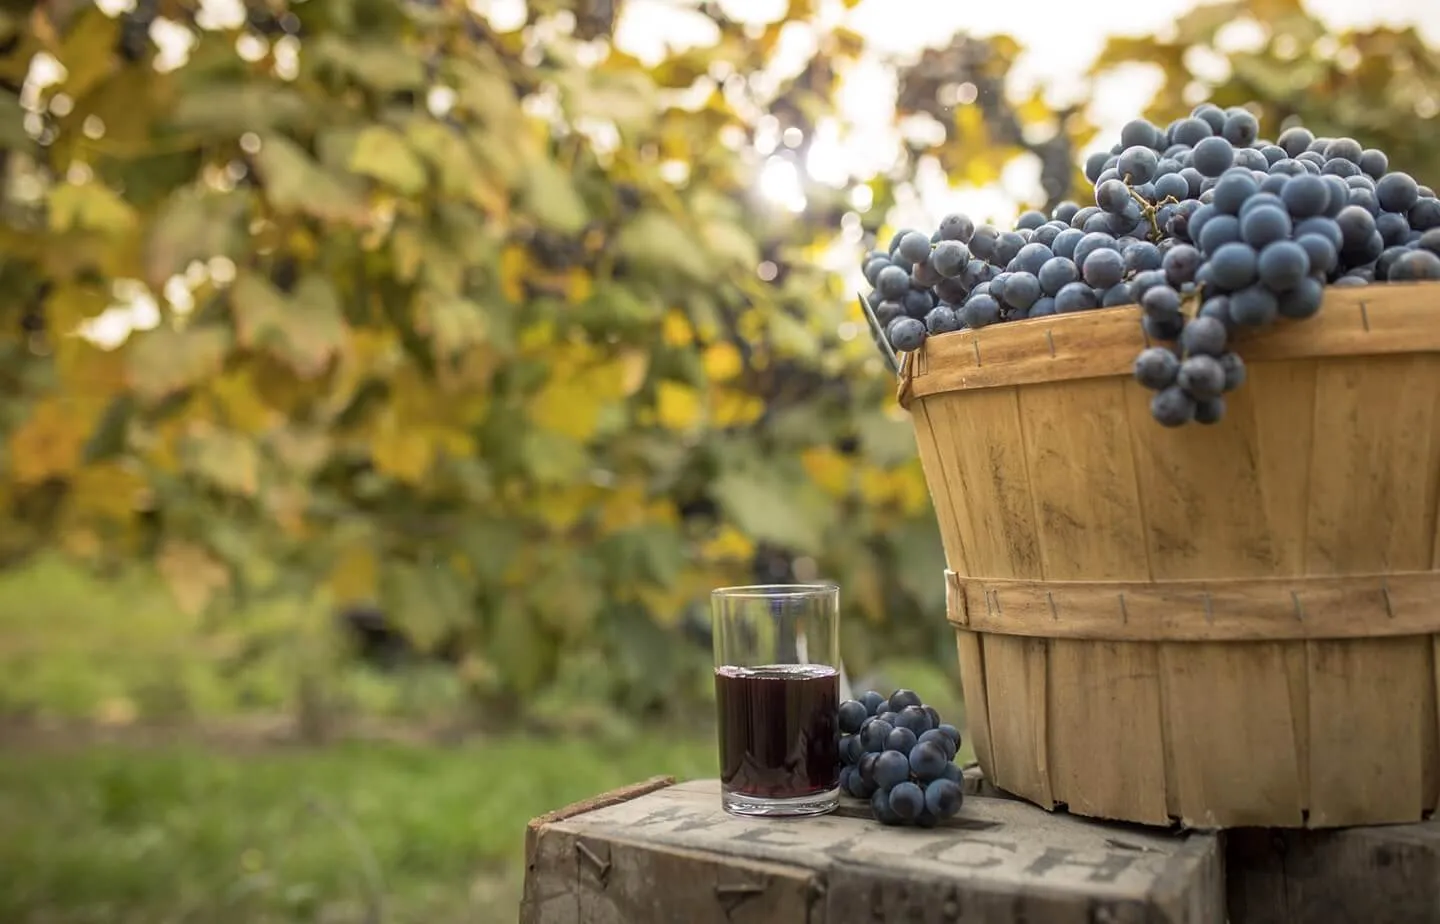 A glass of Welch's Concord grape juice and a full barrel of Concord grapes